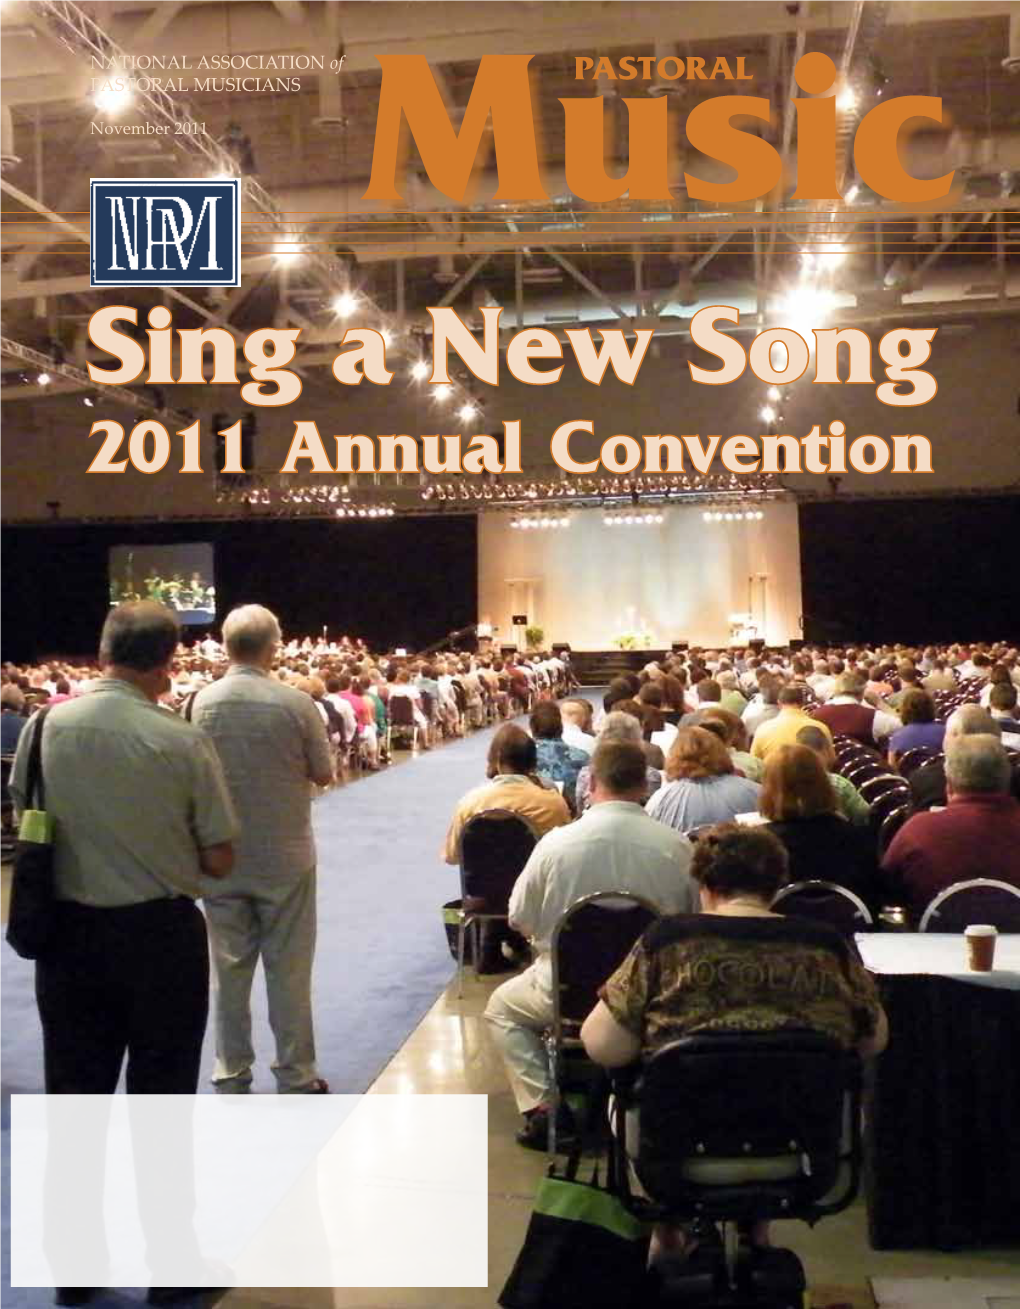 Sing a New Song 2011 Annual Convention the Words We Proclaim at Mass May Change, but Our Faith Remains Constant